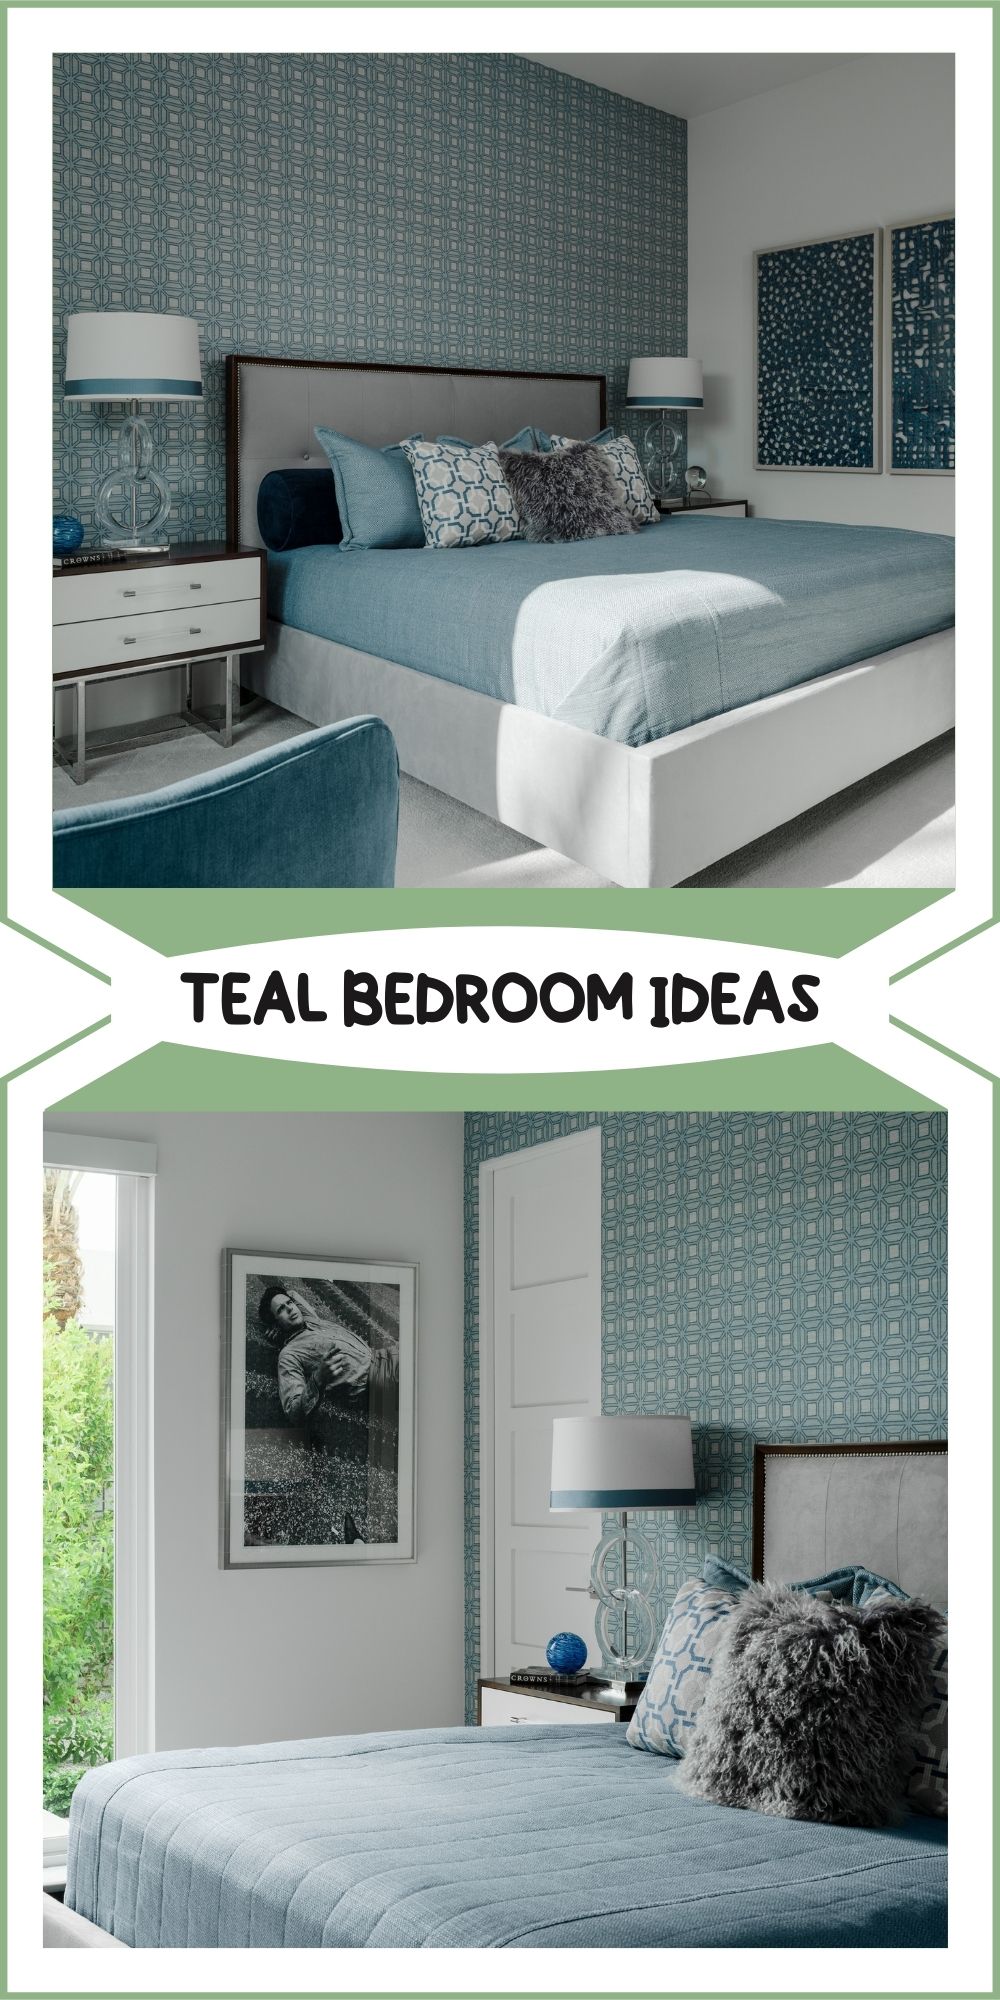 yellow and teal bedroom ideas